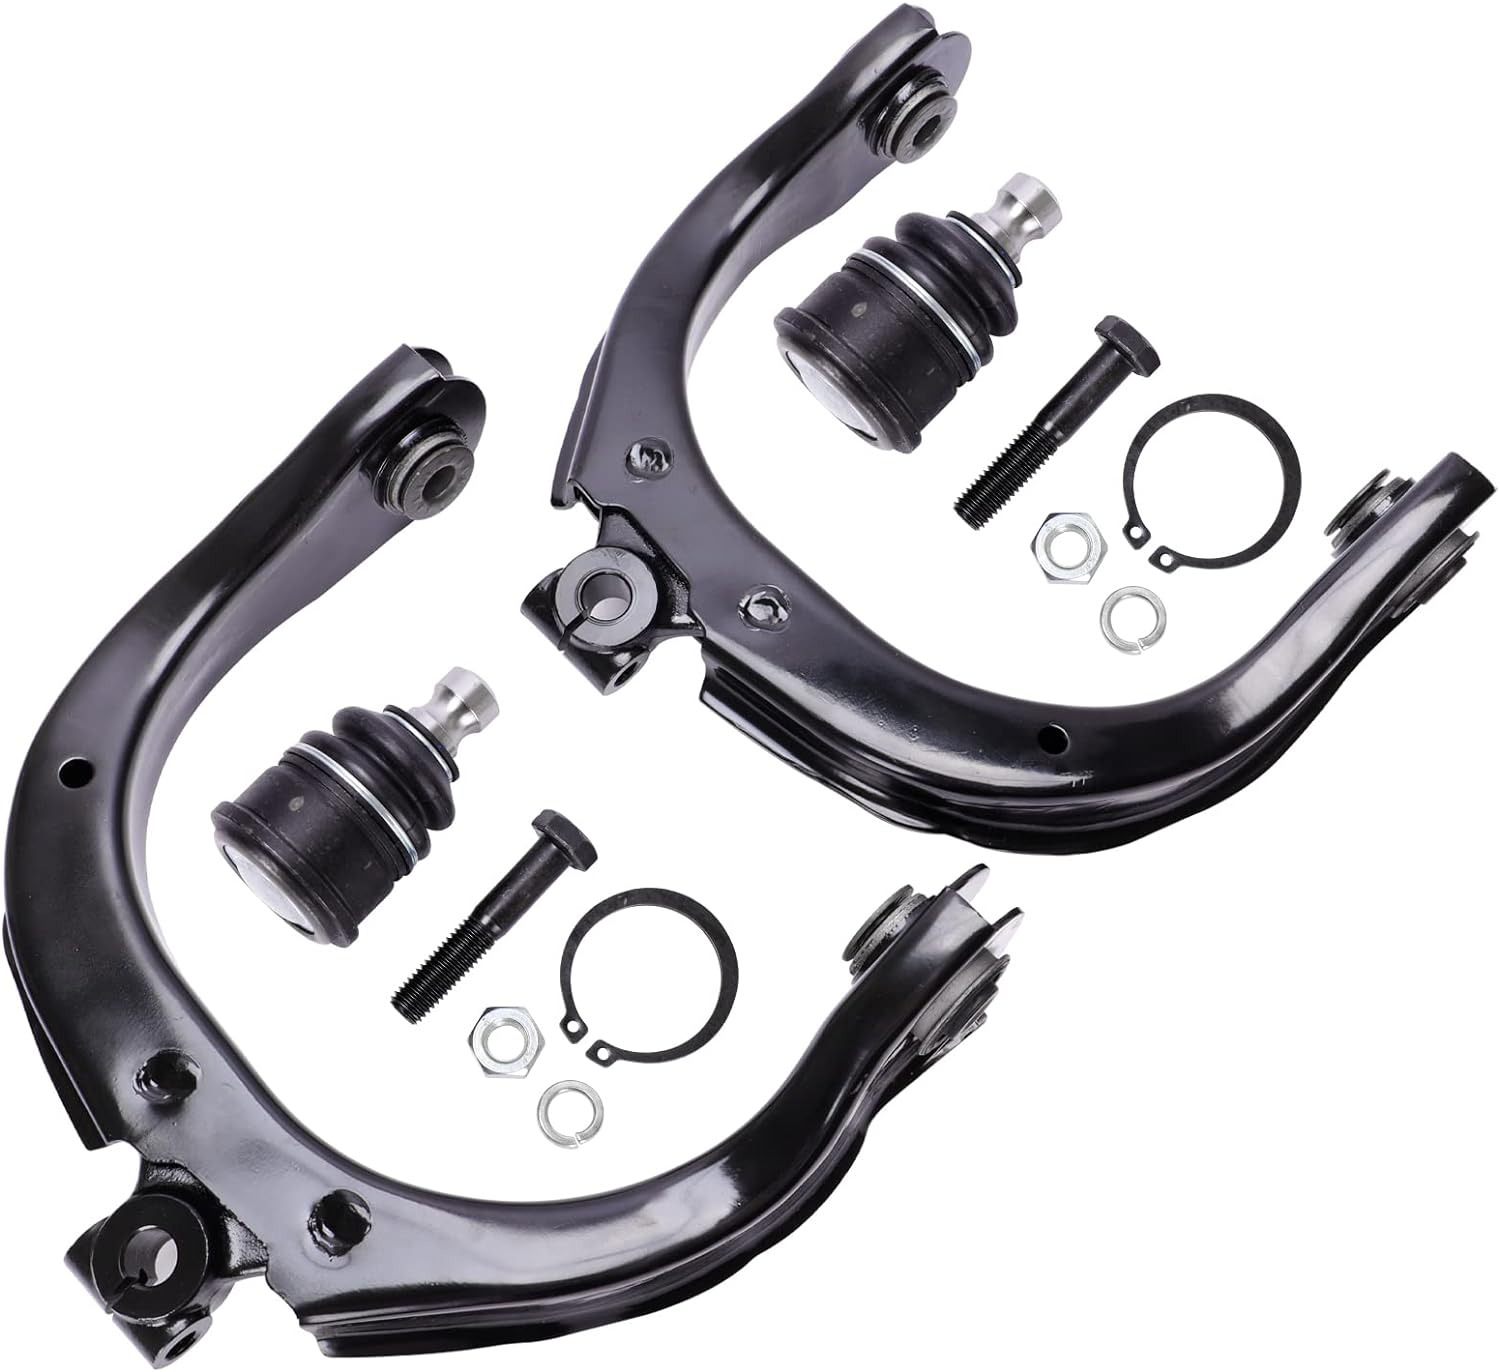 Front Upper Control Arms W/Ball Joints for 2002-2009 Chevy Trailblazer/Ssr, 2002